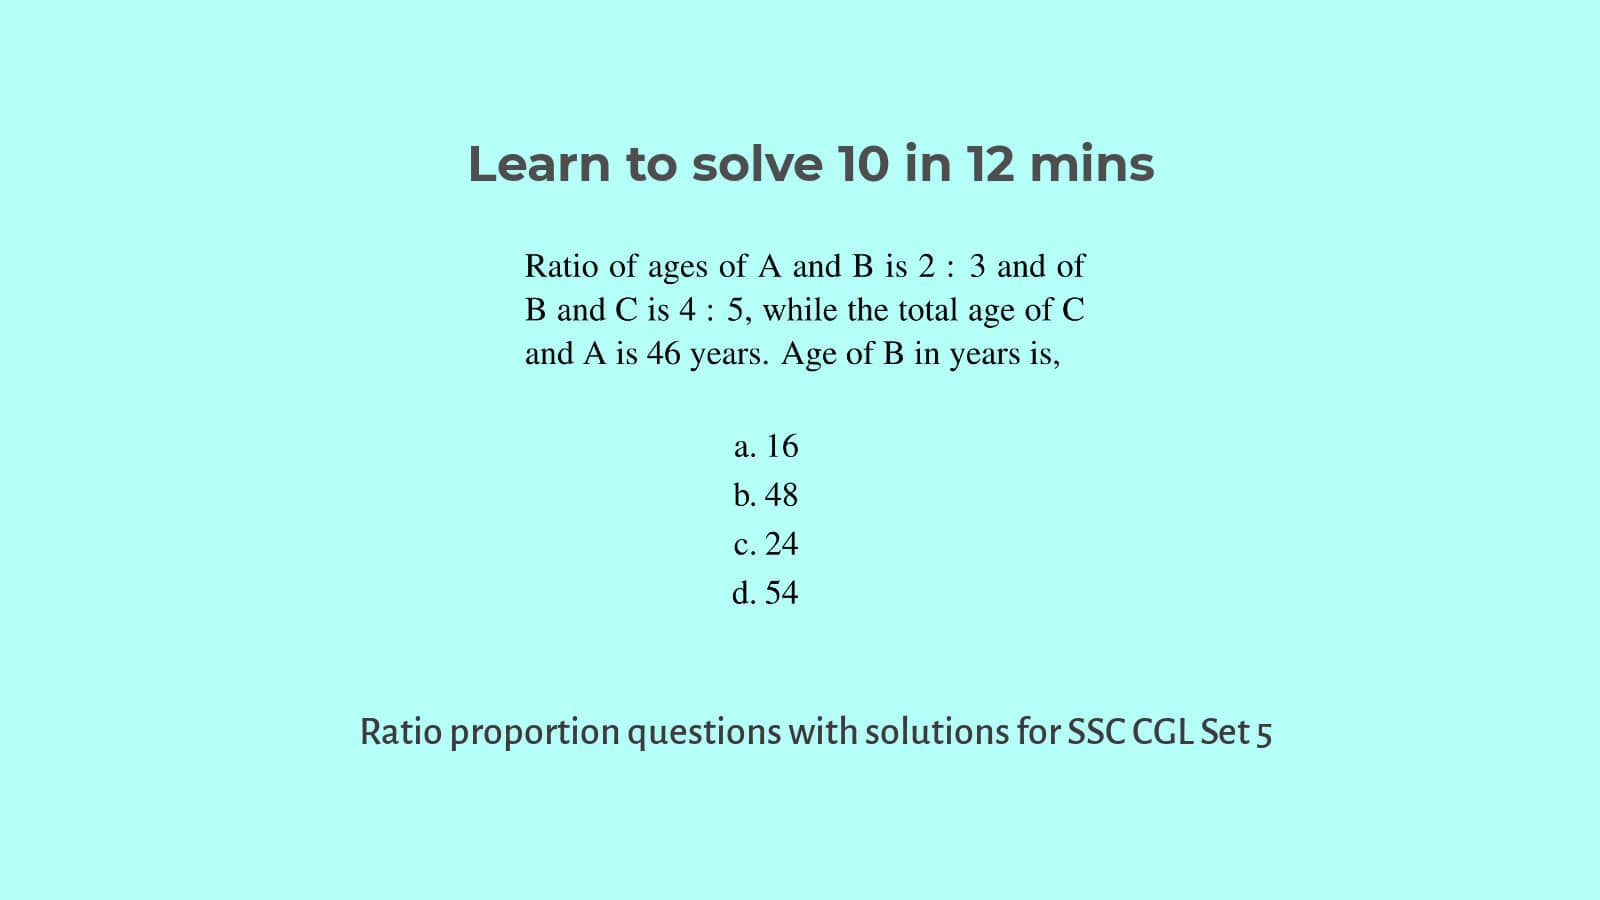 Ratio proportion questions for SSC CGL Solution set 5